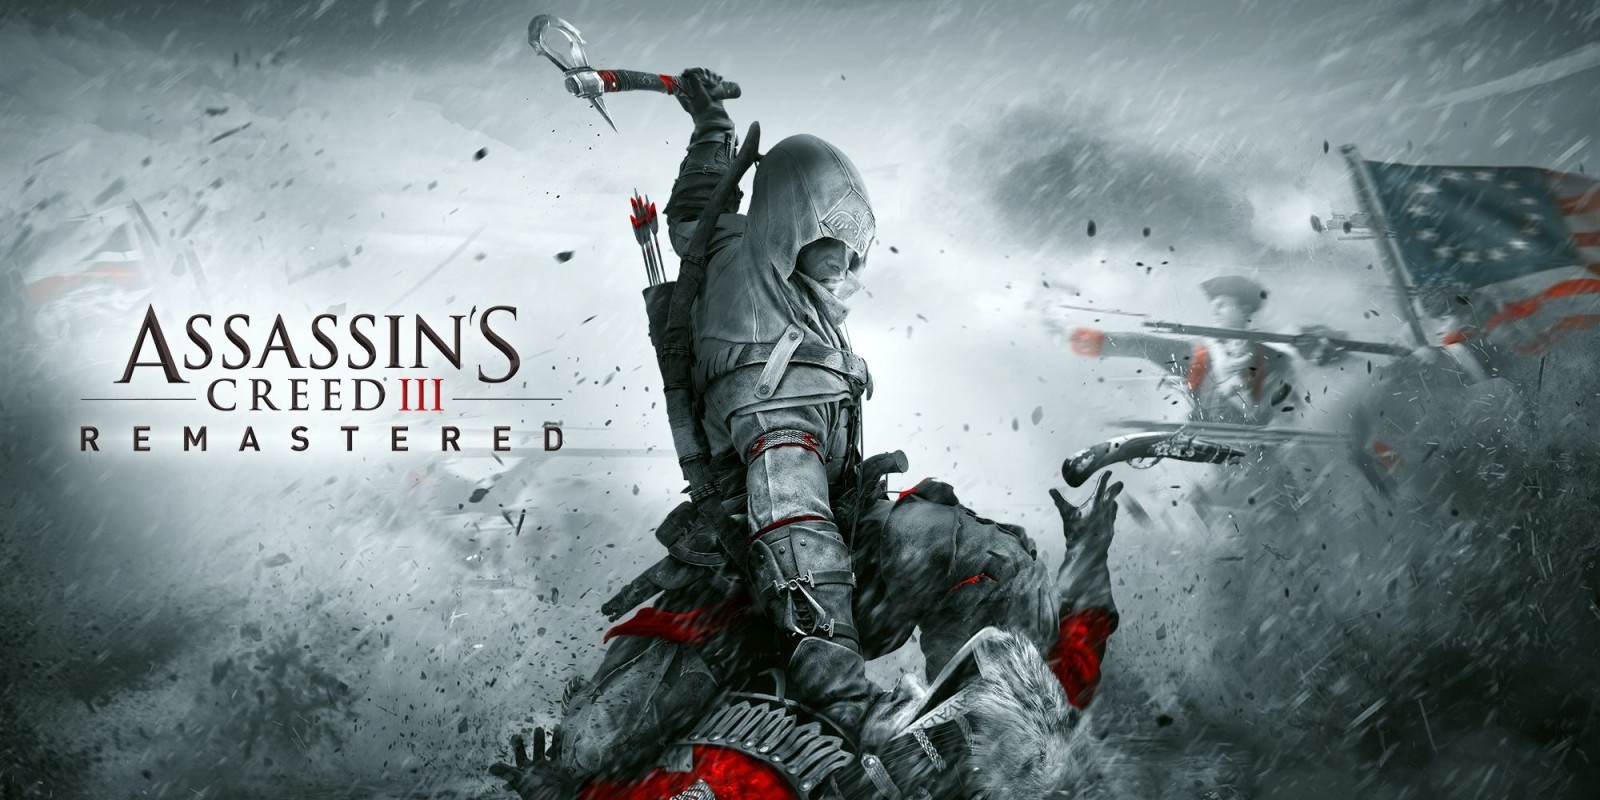 assassin's creed 3 switch price